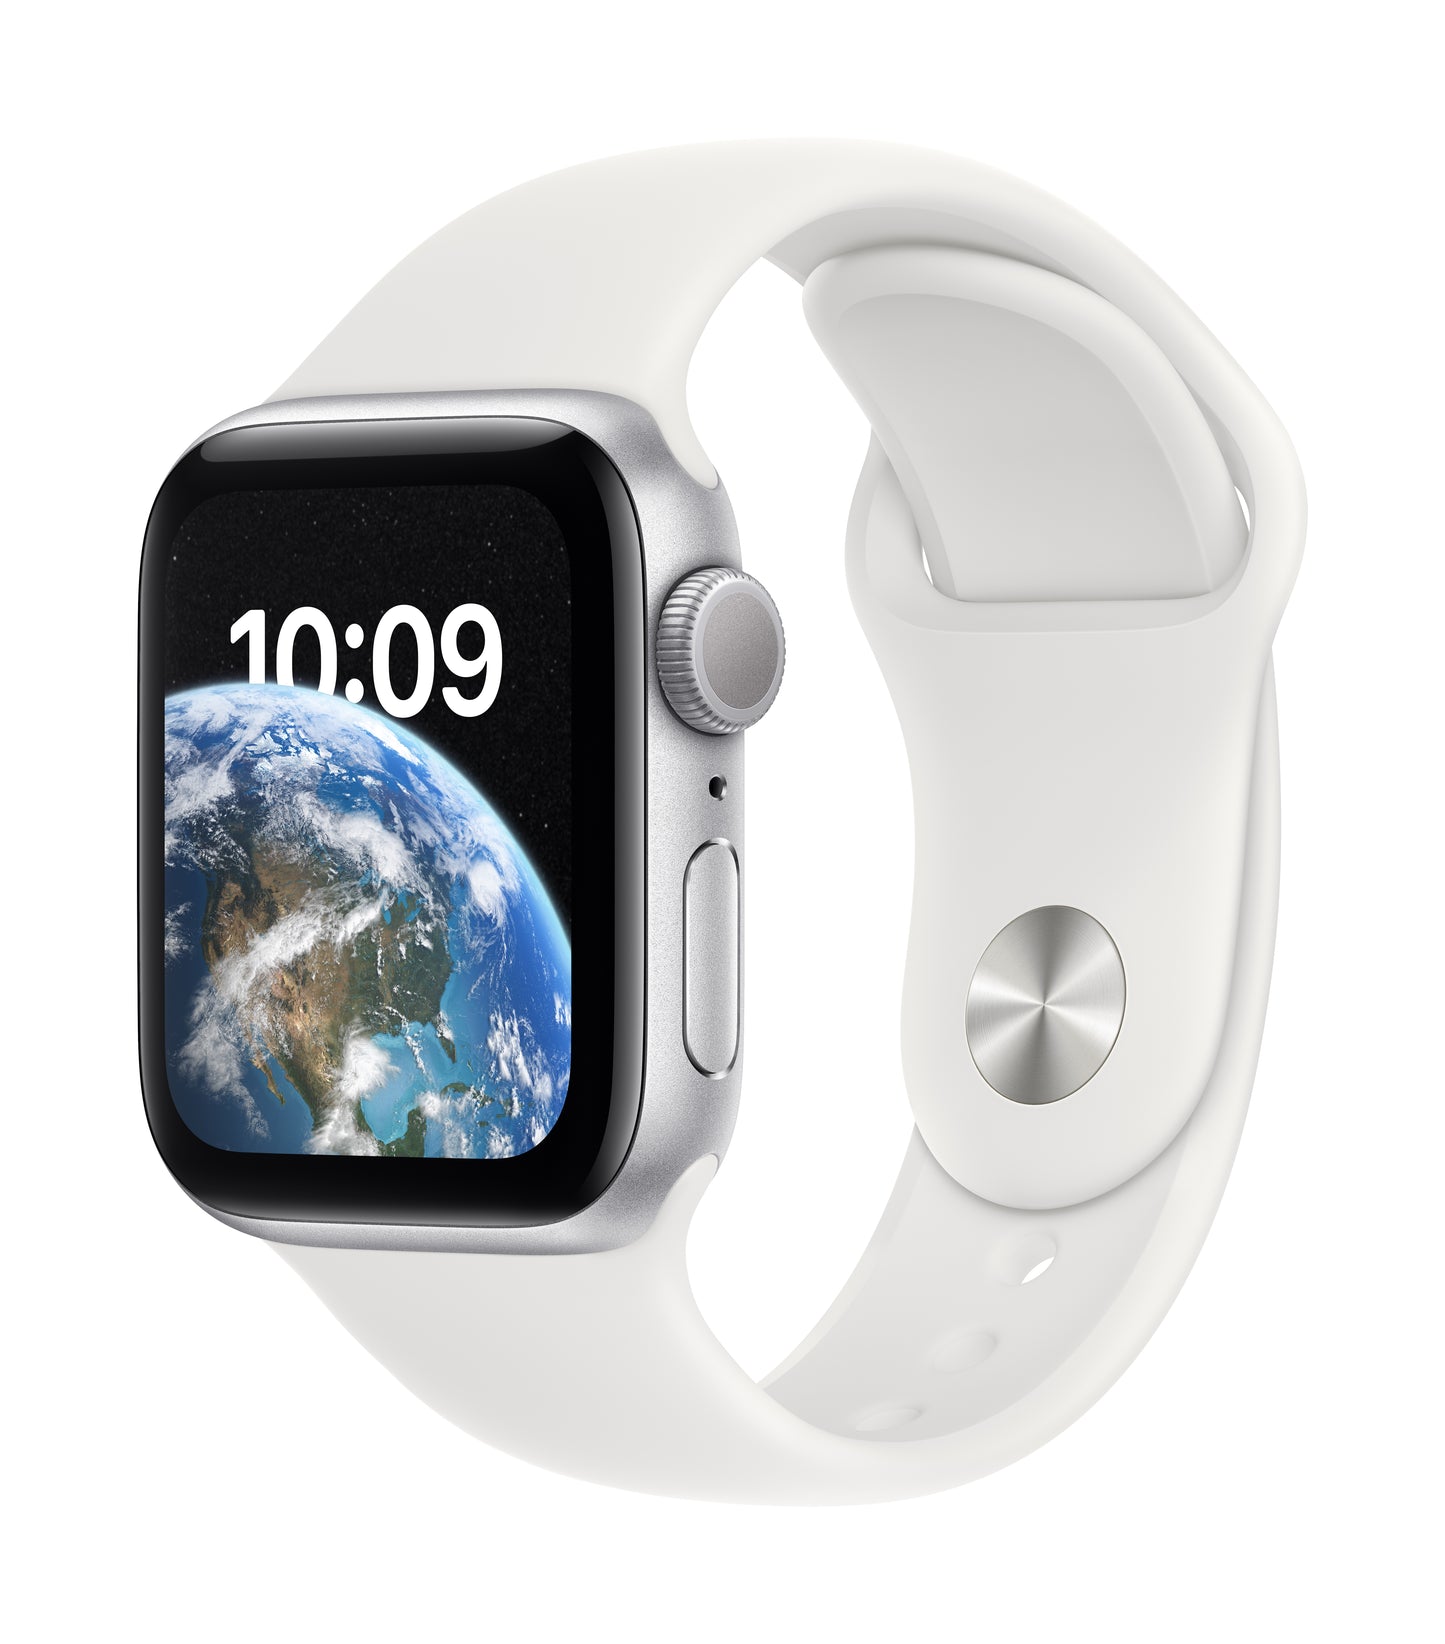 Apple Watch SE GPS 40mm Silver Aluminum Case with White Sport Band - S/M